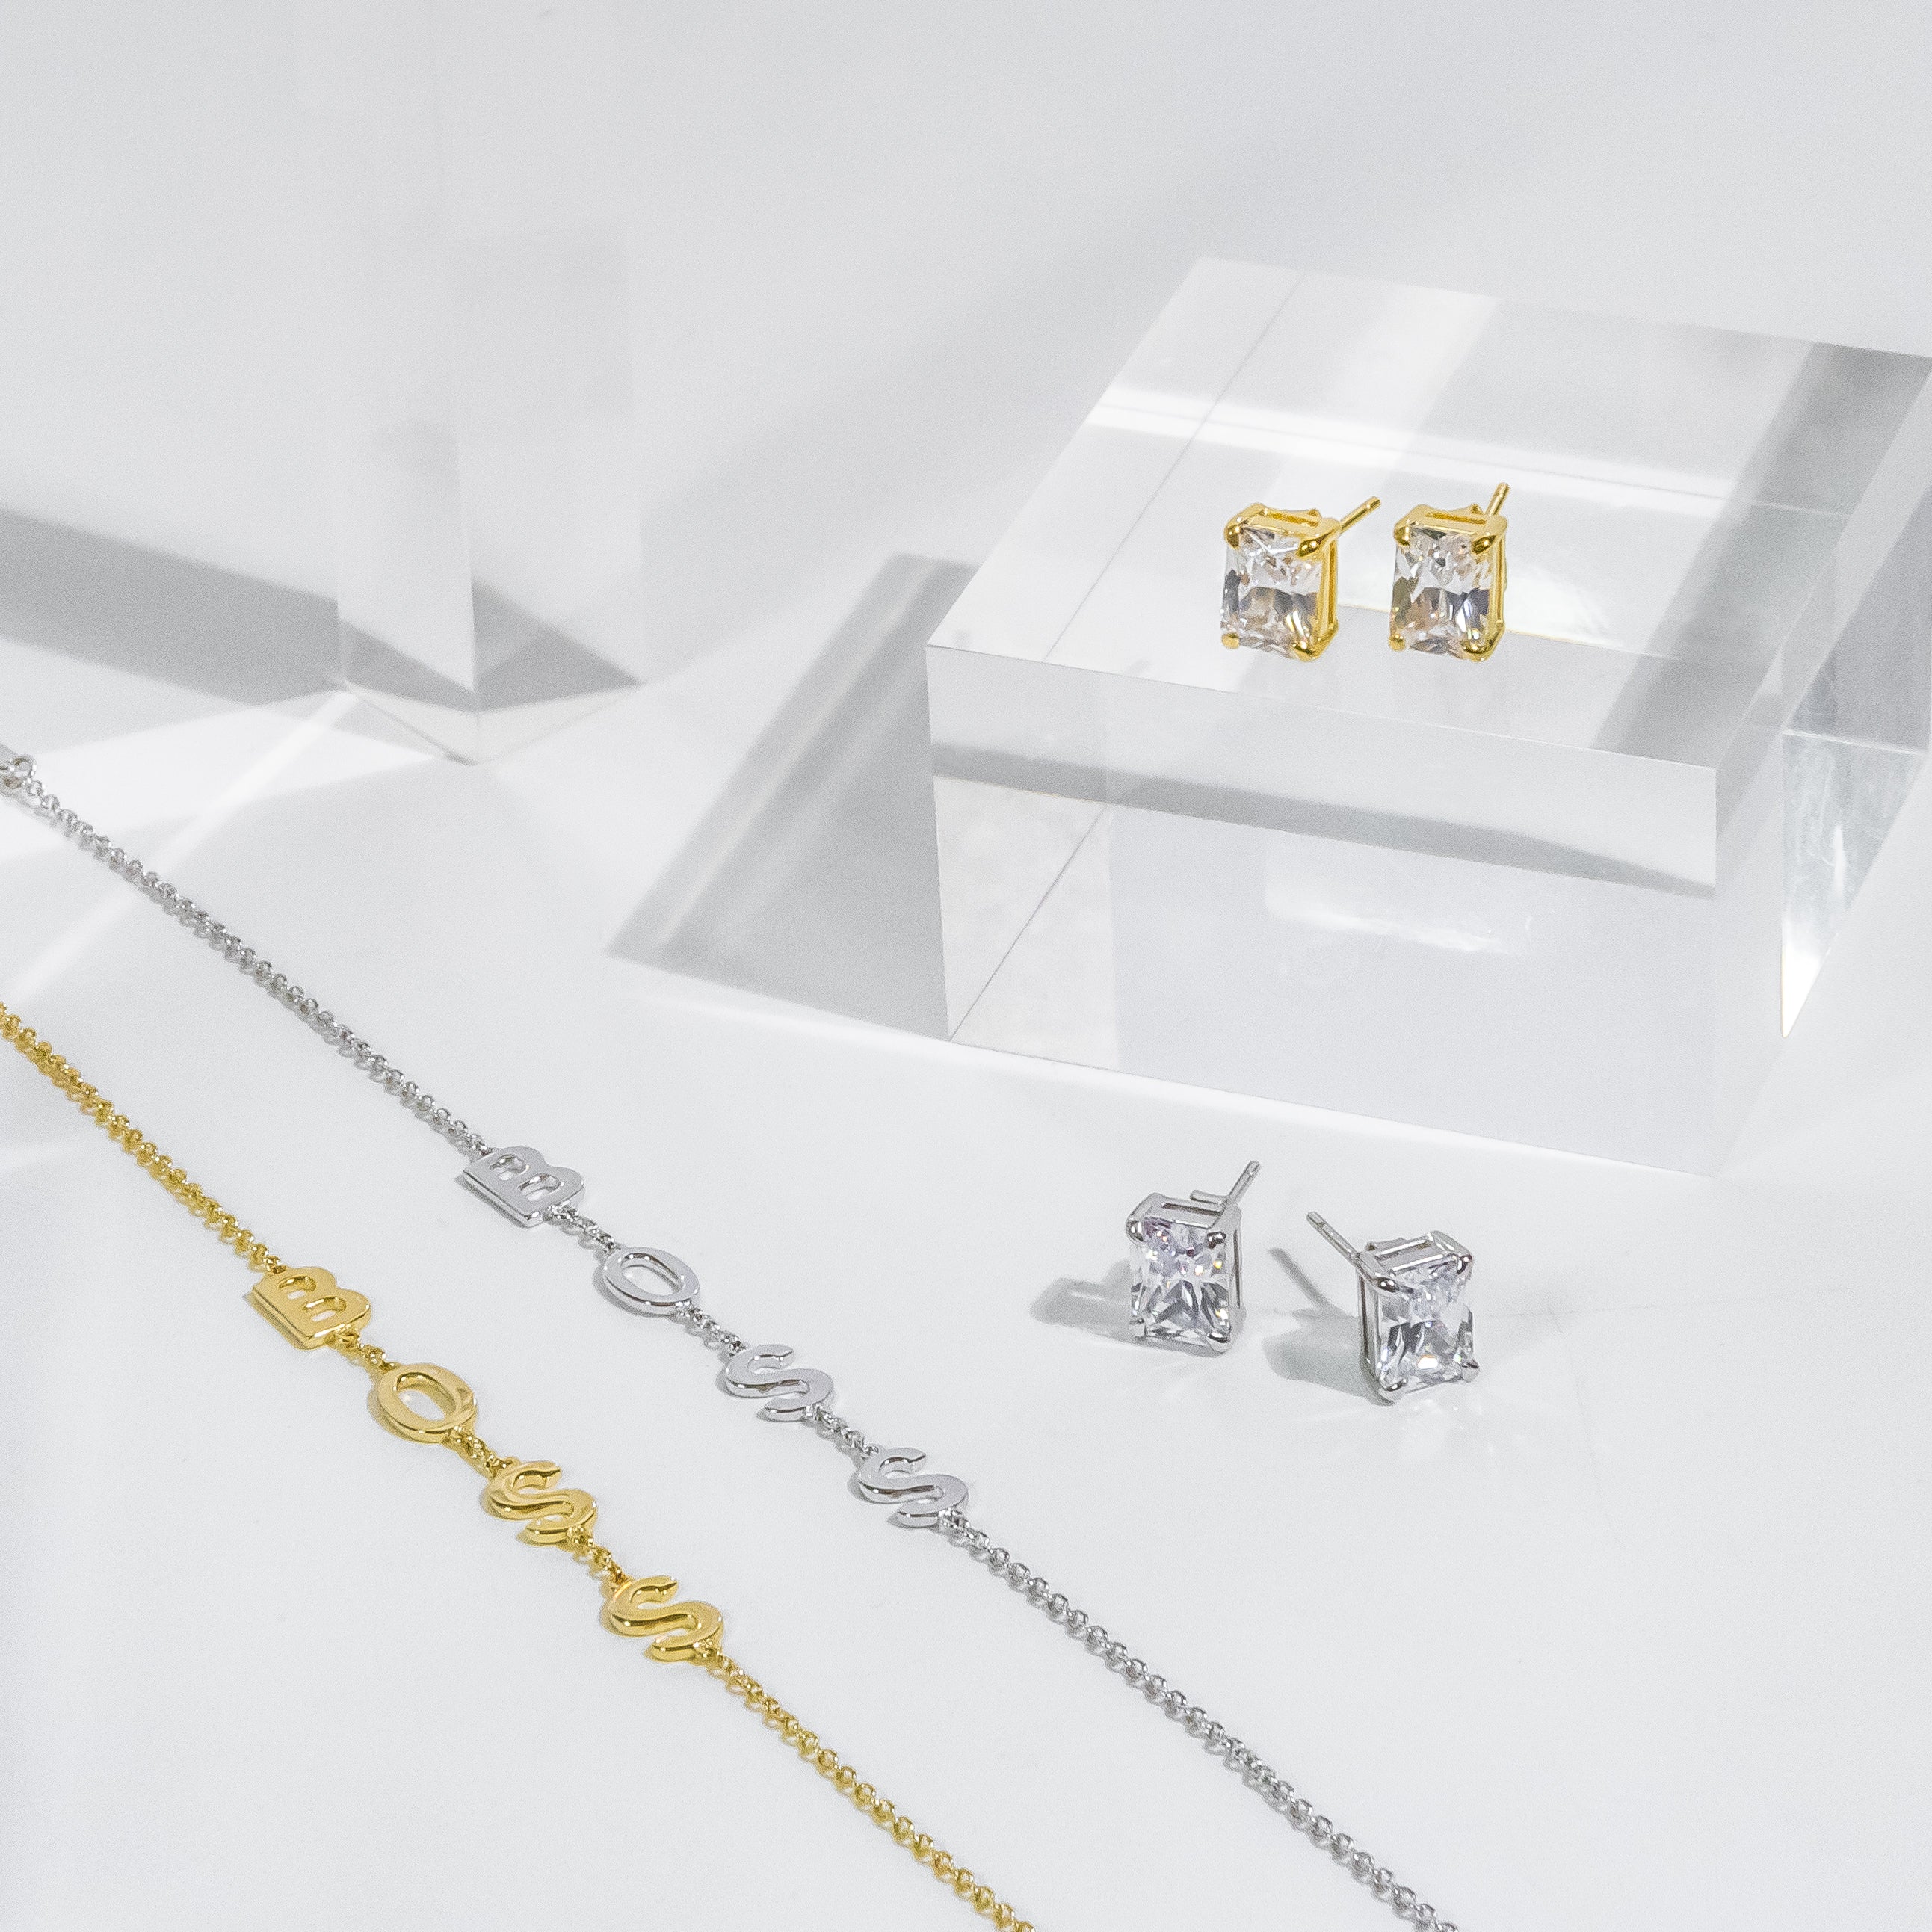 BOSS Stunning Studs Earrings and Chain Bracelets in Gold, White Gold, and Silver